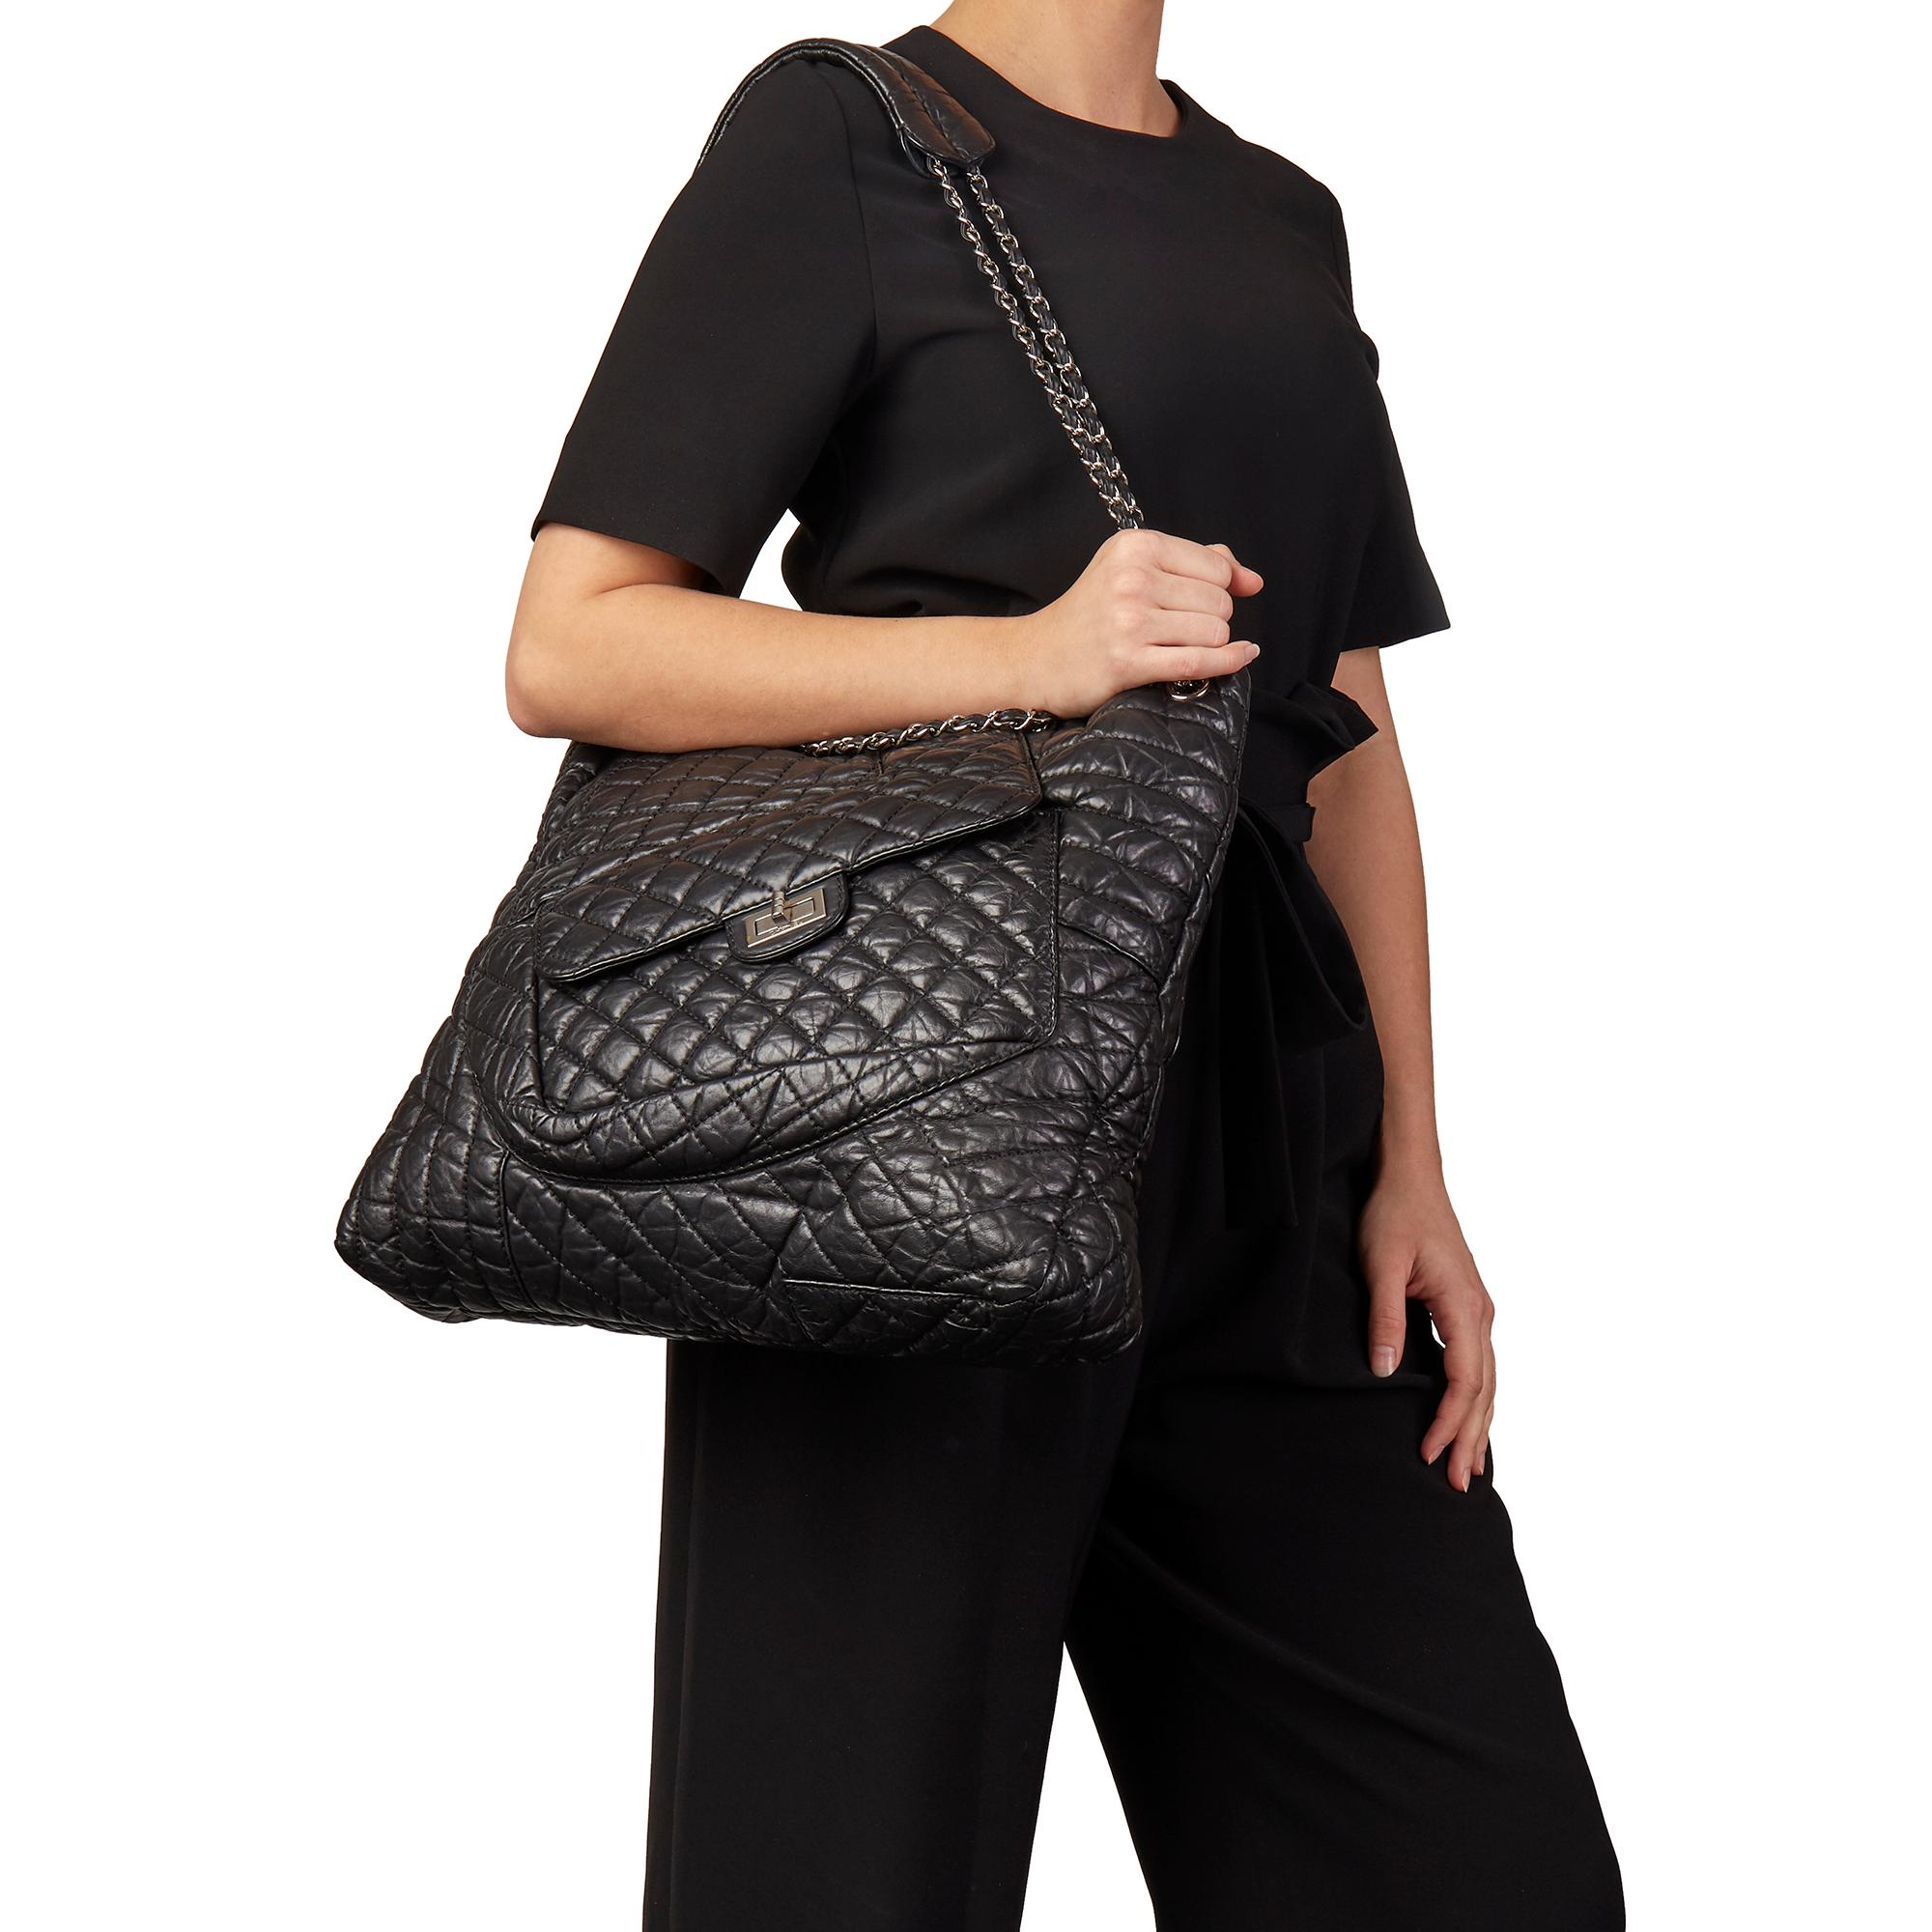 CHANEL
Black Quilted Aged Calfskin Leather Fantasy Shopping  Tote

Xupes Reference: HB3162
Serial Number: 13919799
Age (Circa): 2010
Accompanied By: Authenticity Card
Authenticity Details: Serial Sticker, Authenticity Card (Made in Italy)
Gender: